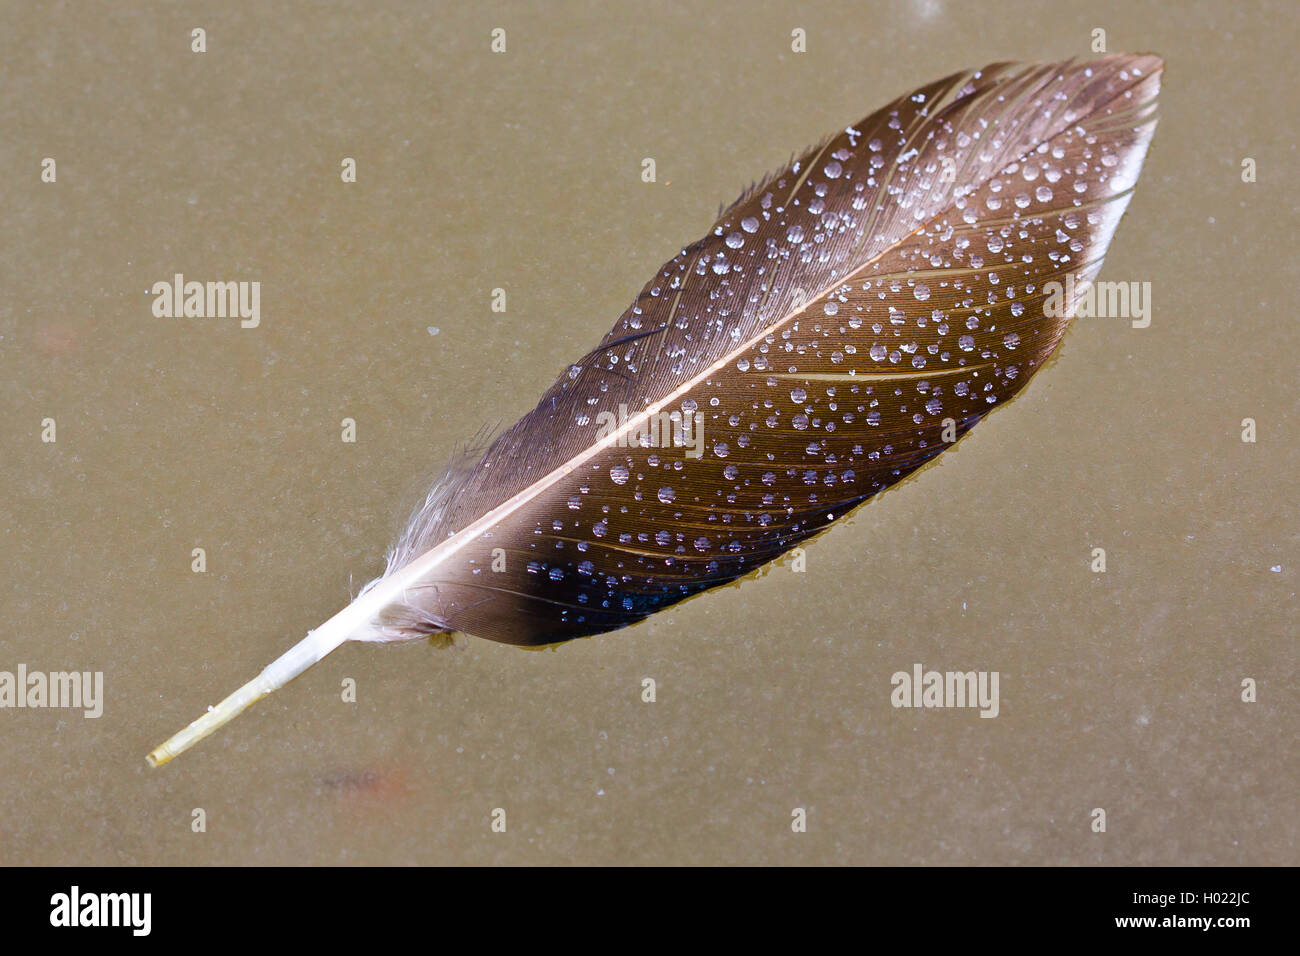 screamers and waterfowl (ducks/geese/swans) (Anseriformes), duck feather with waterdrops swimming on the water, Germany Stock Photo